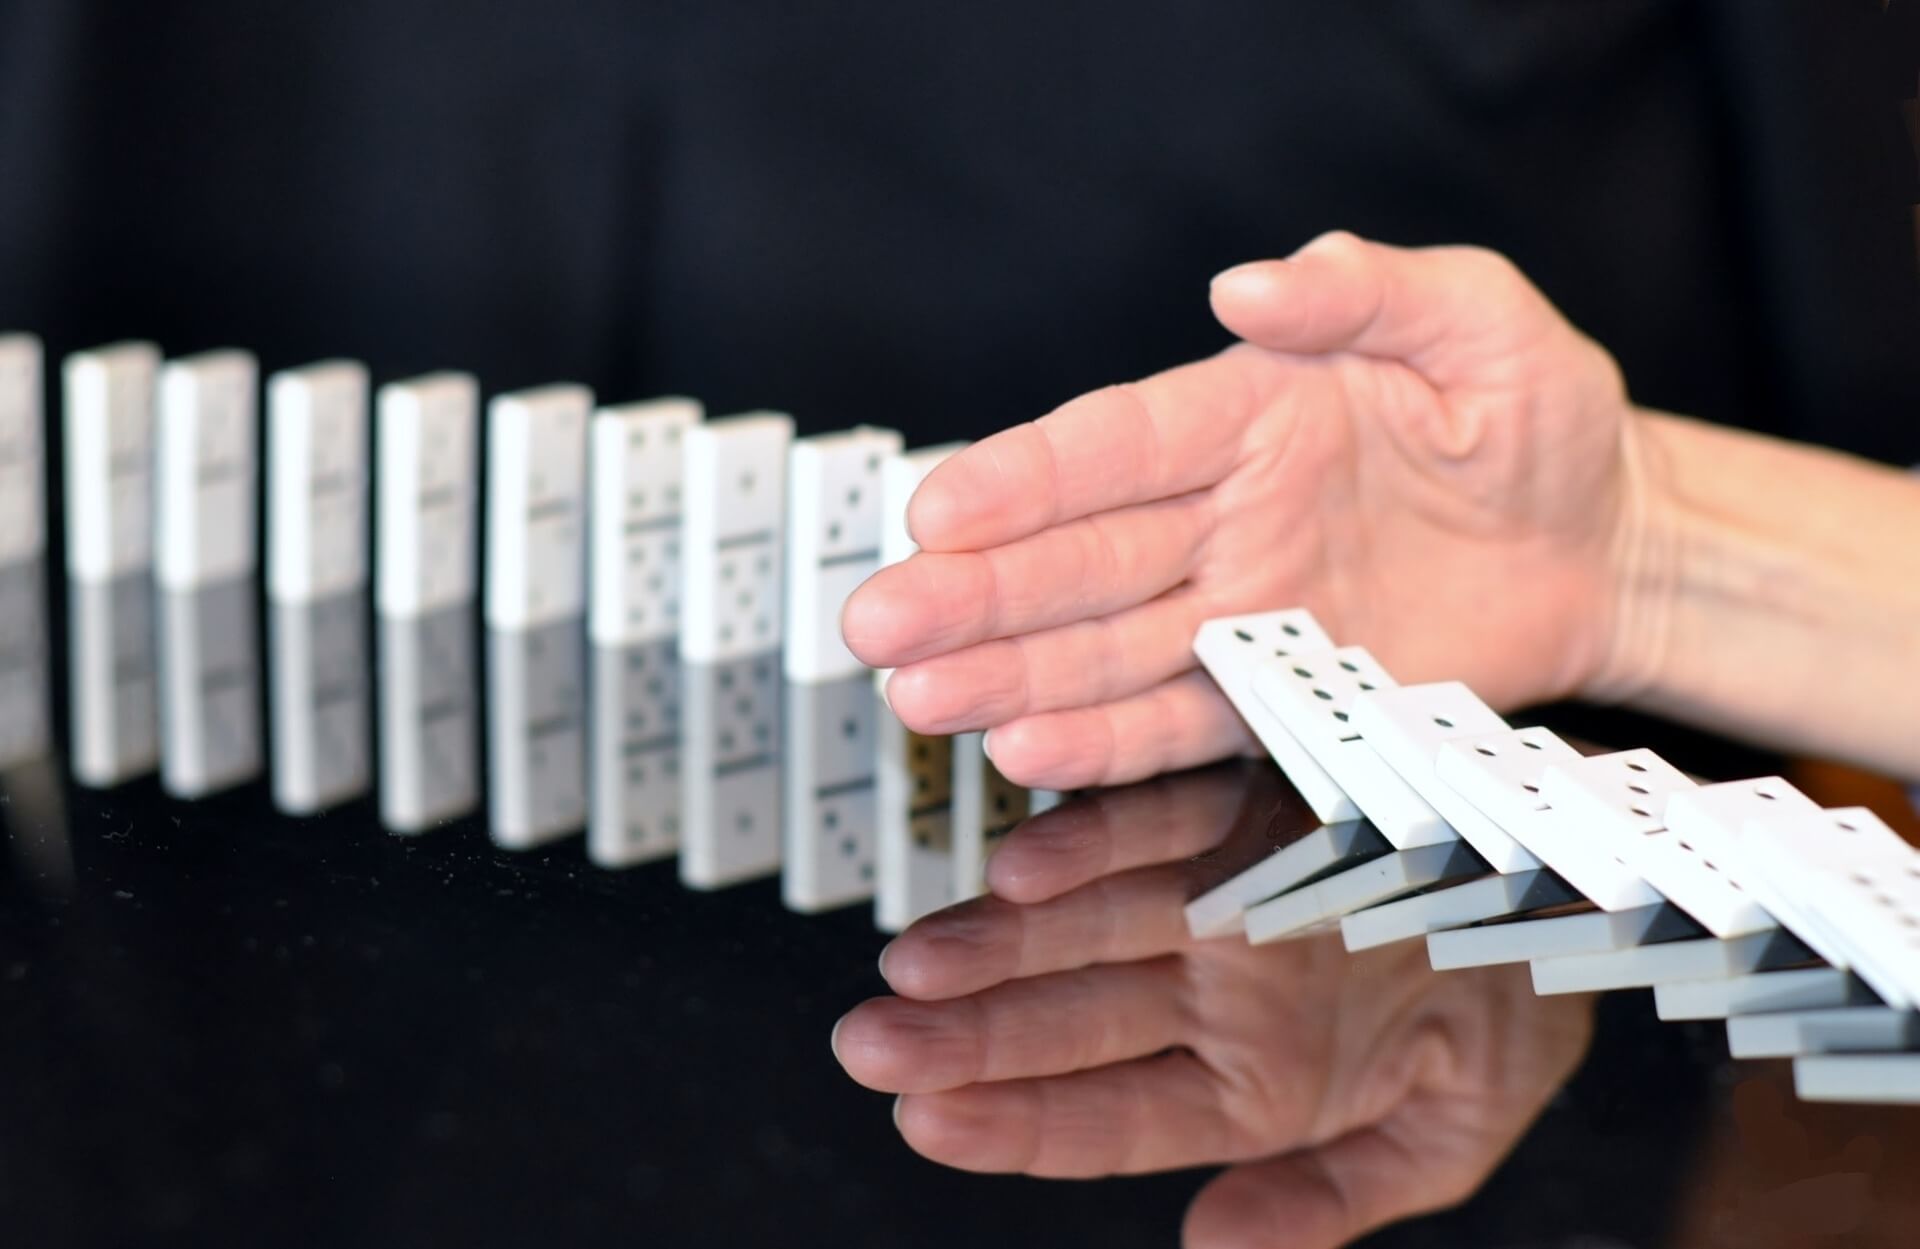 A hand stops a row of dominoes from falling